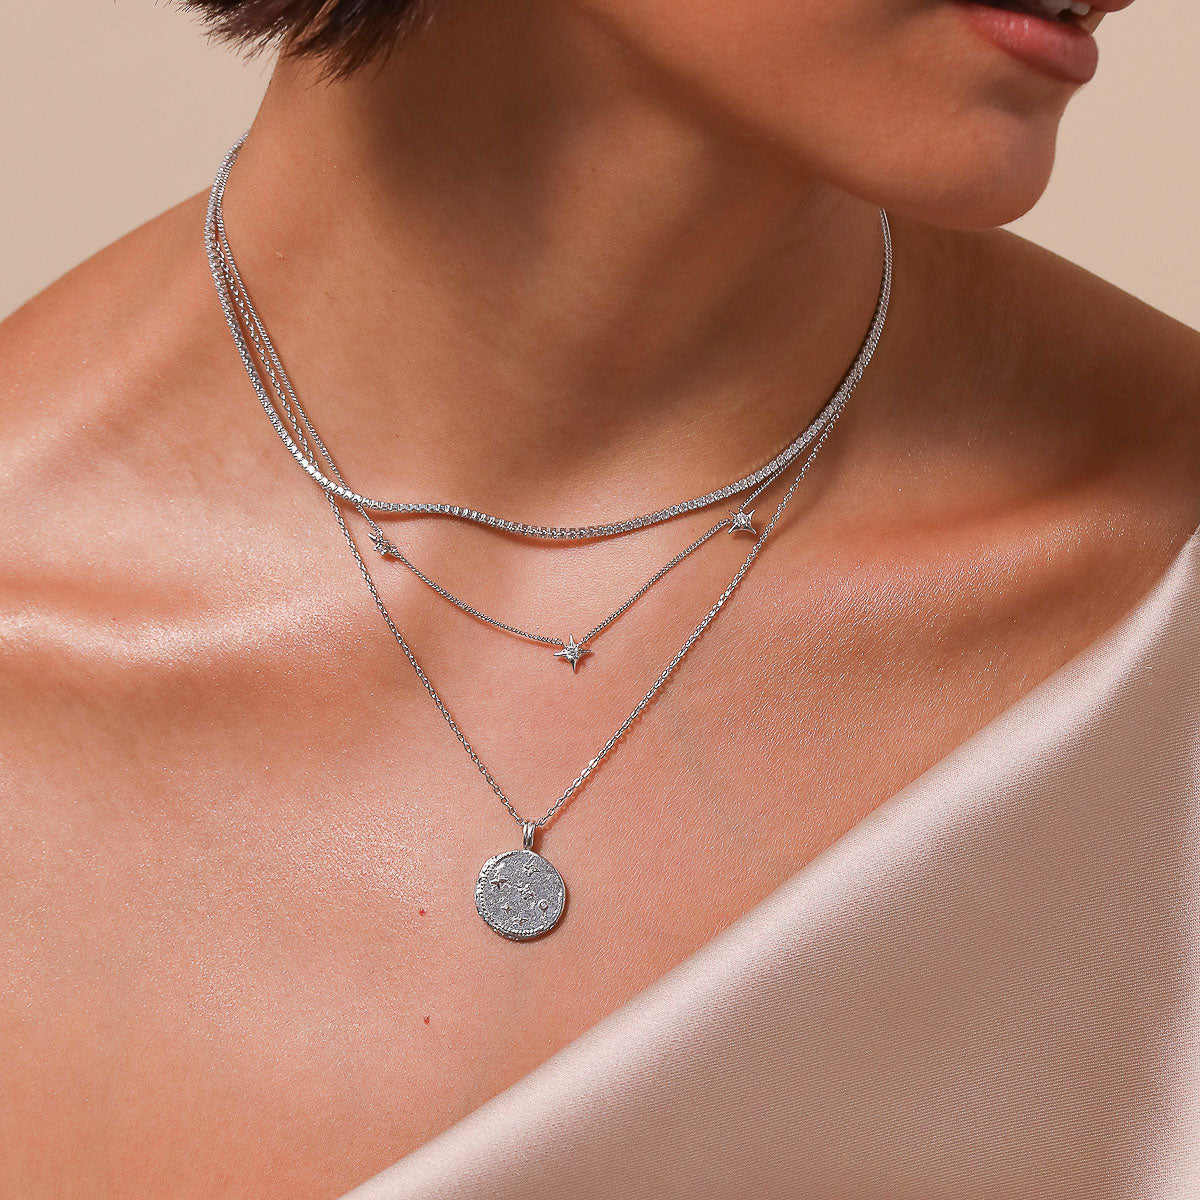 Aries Zodiac Pendant Necklace in Silver worn layered with necklaces